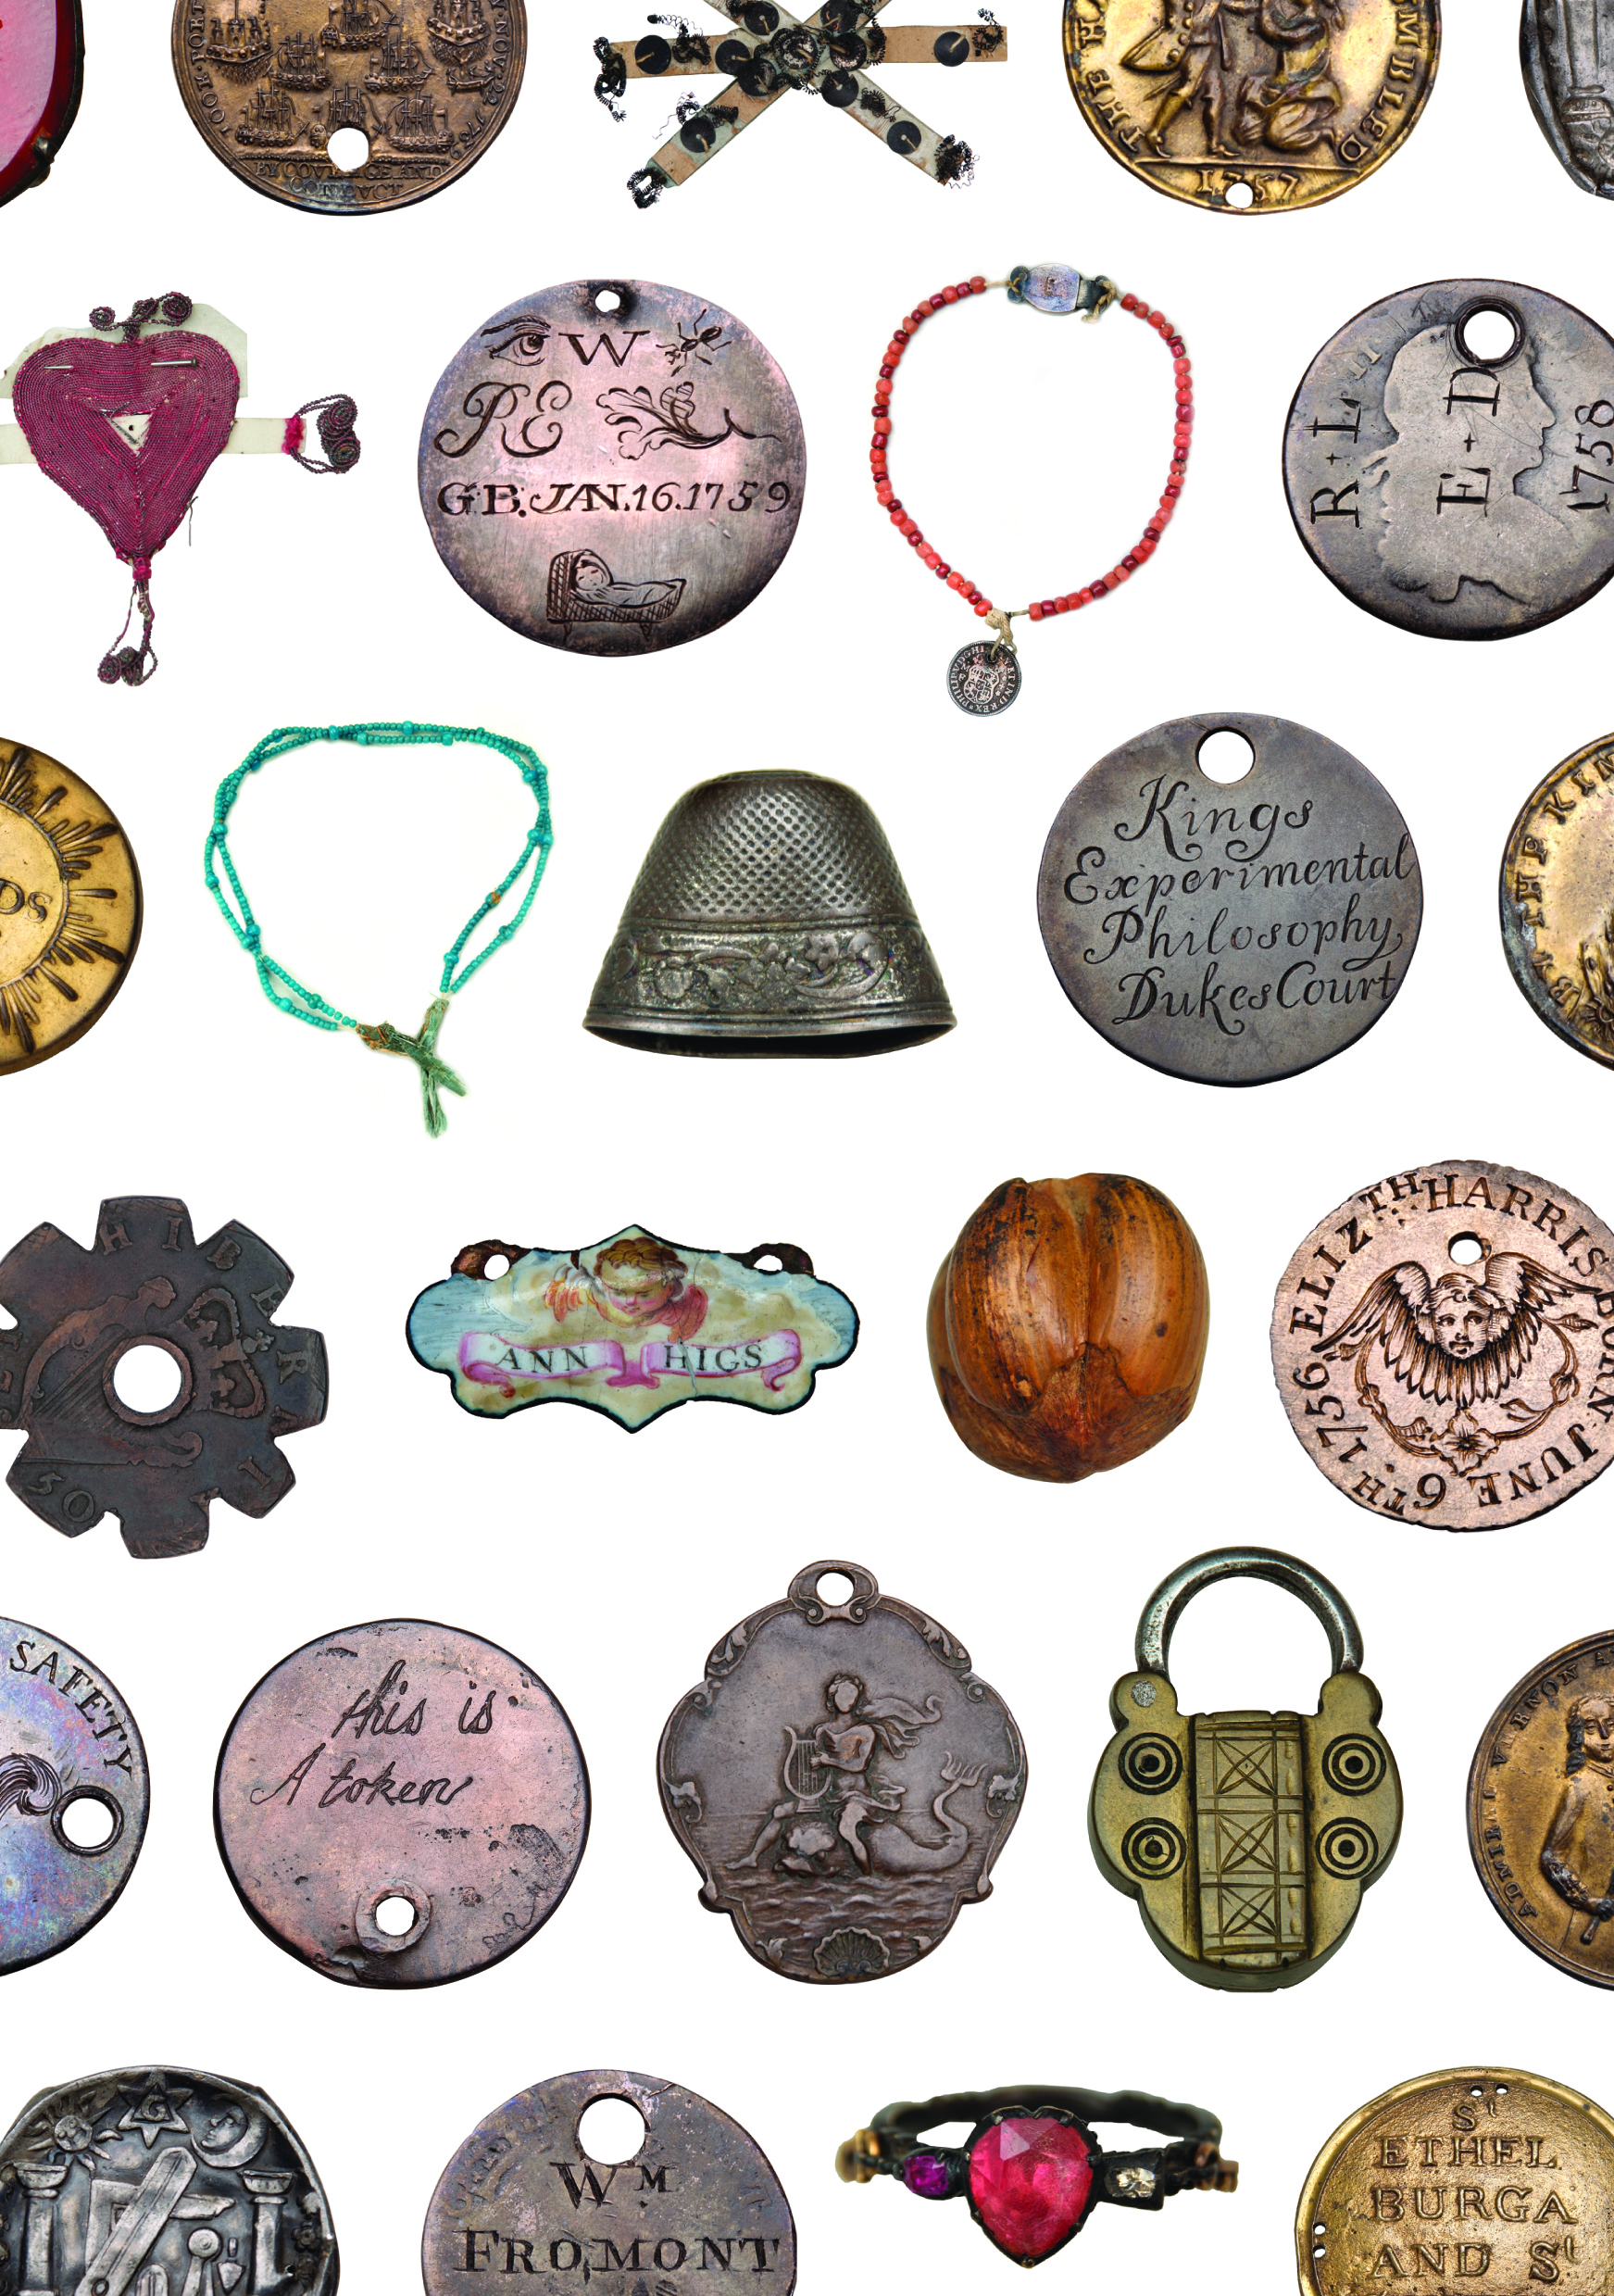 A colour photograph of a selection of ‘tokens’ left by mothers at the Foundling Hospital. The image includes many metal discs, some engraved with messages or images, two beaded strings and a fabric heart.